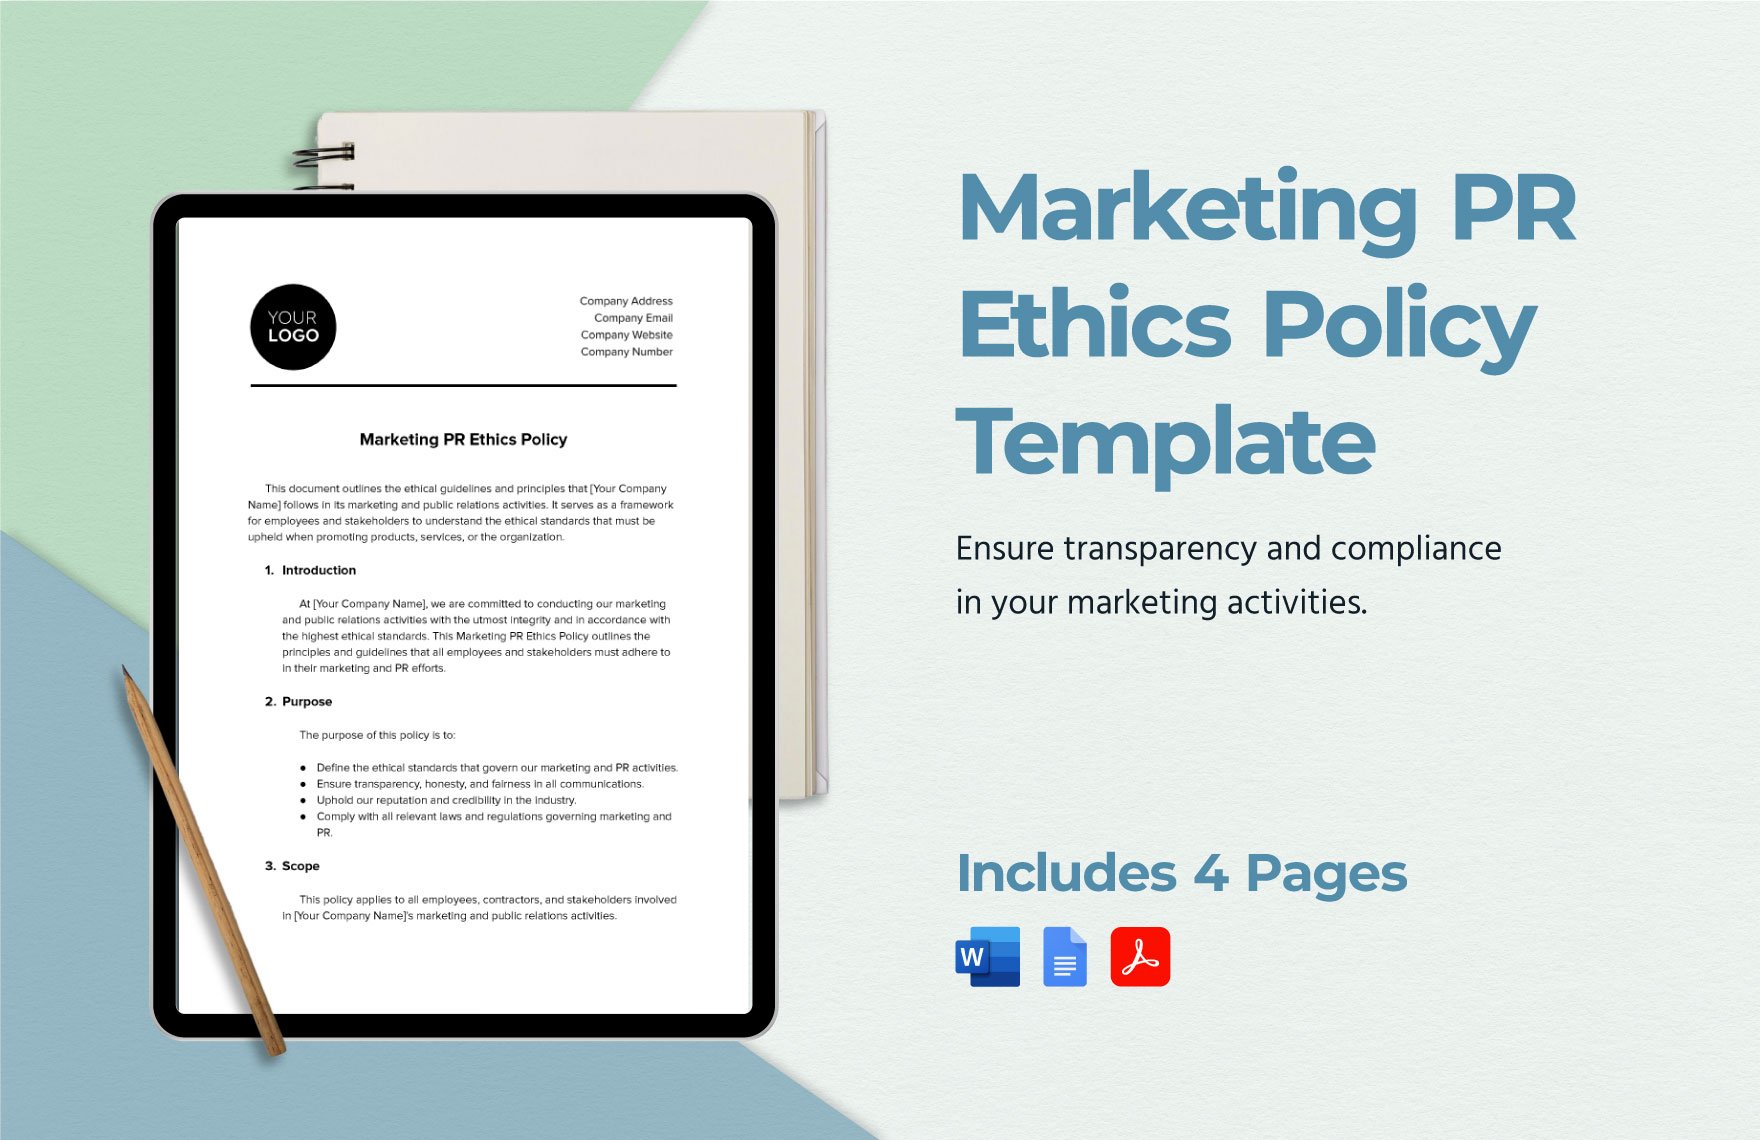 Marketing PR Ethics Policy Template